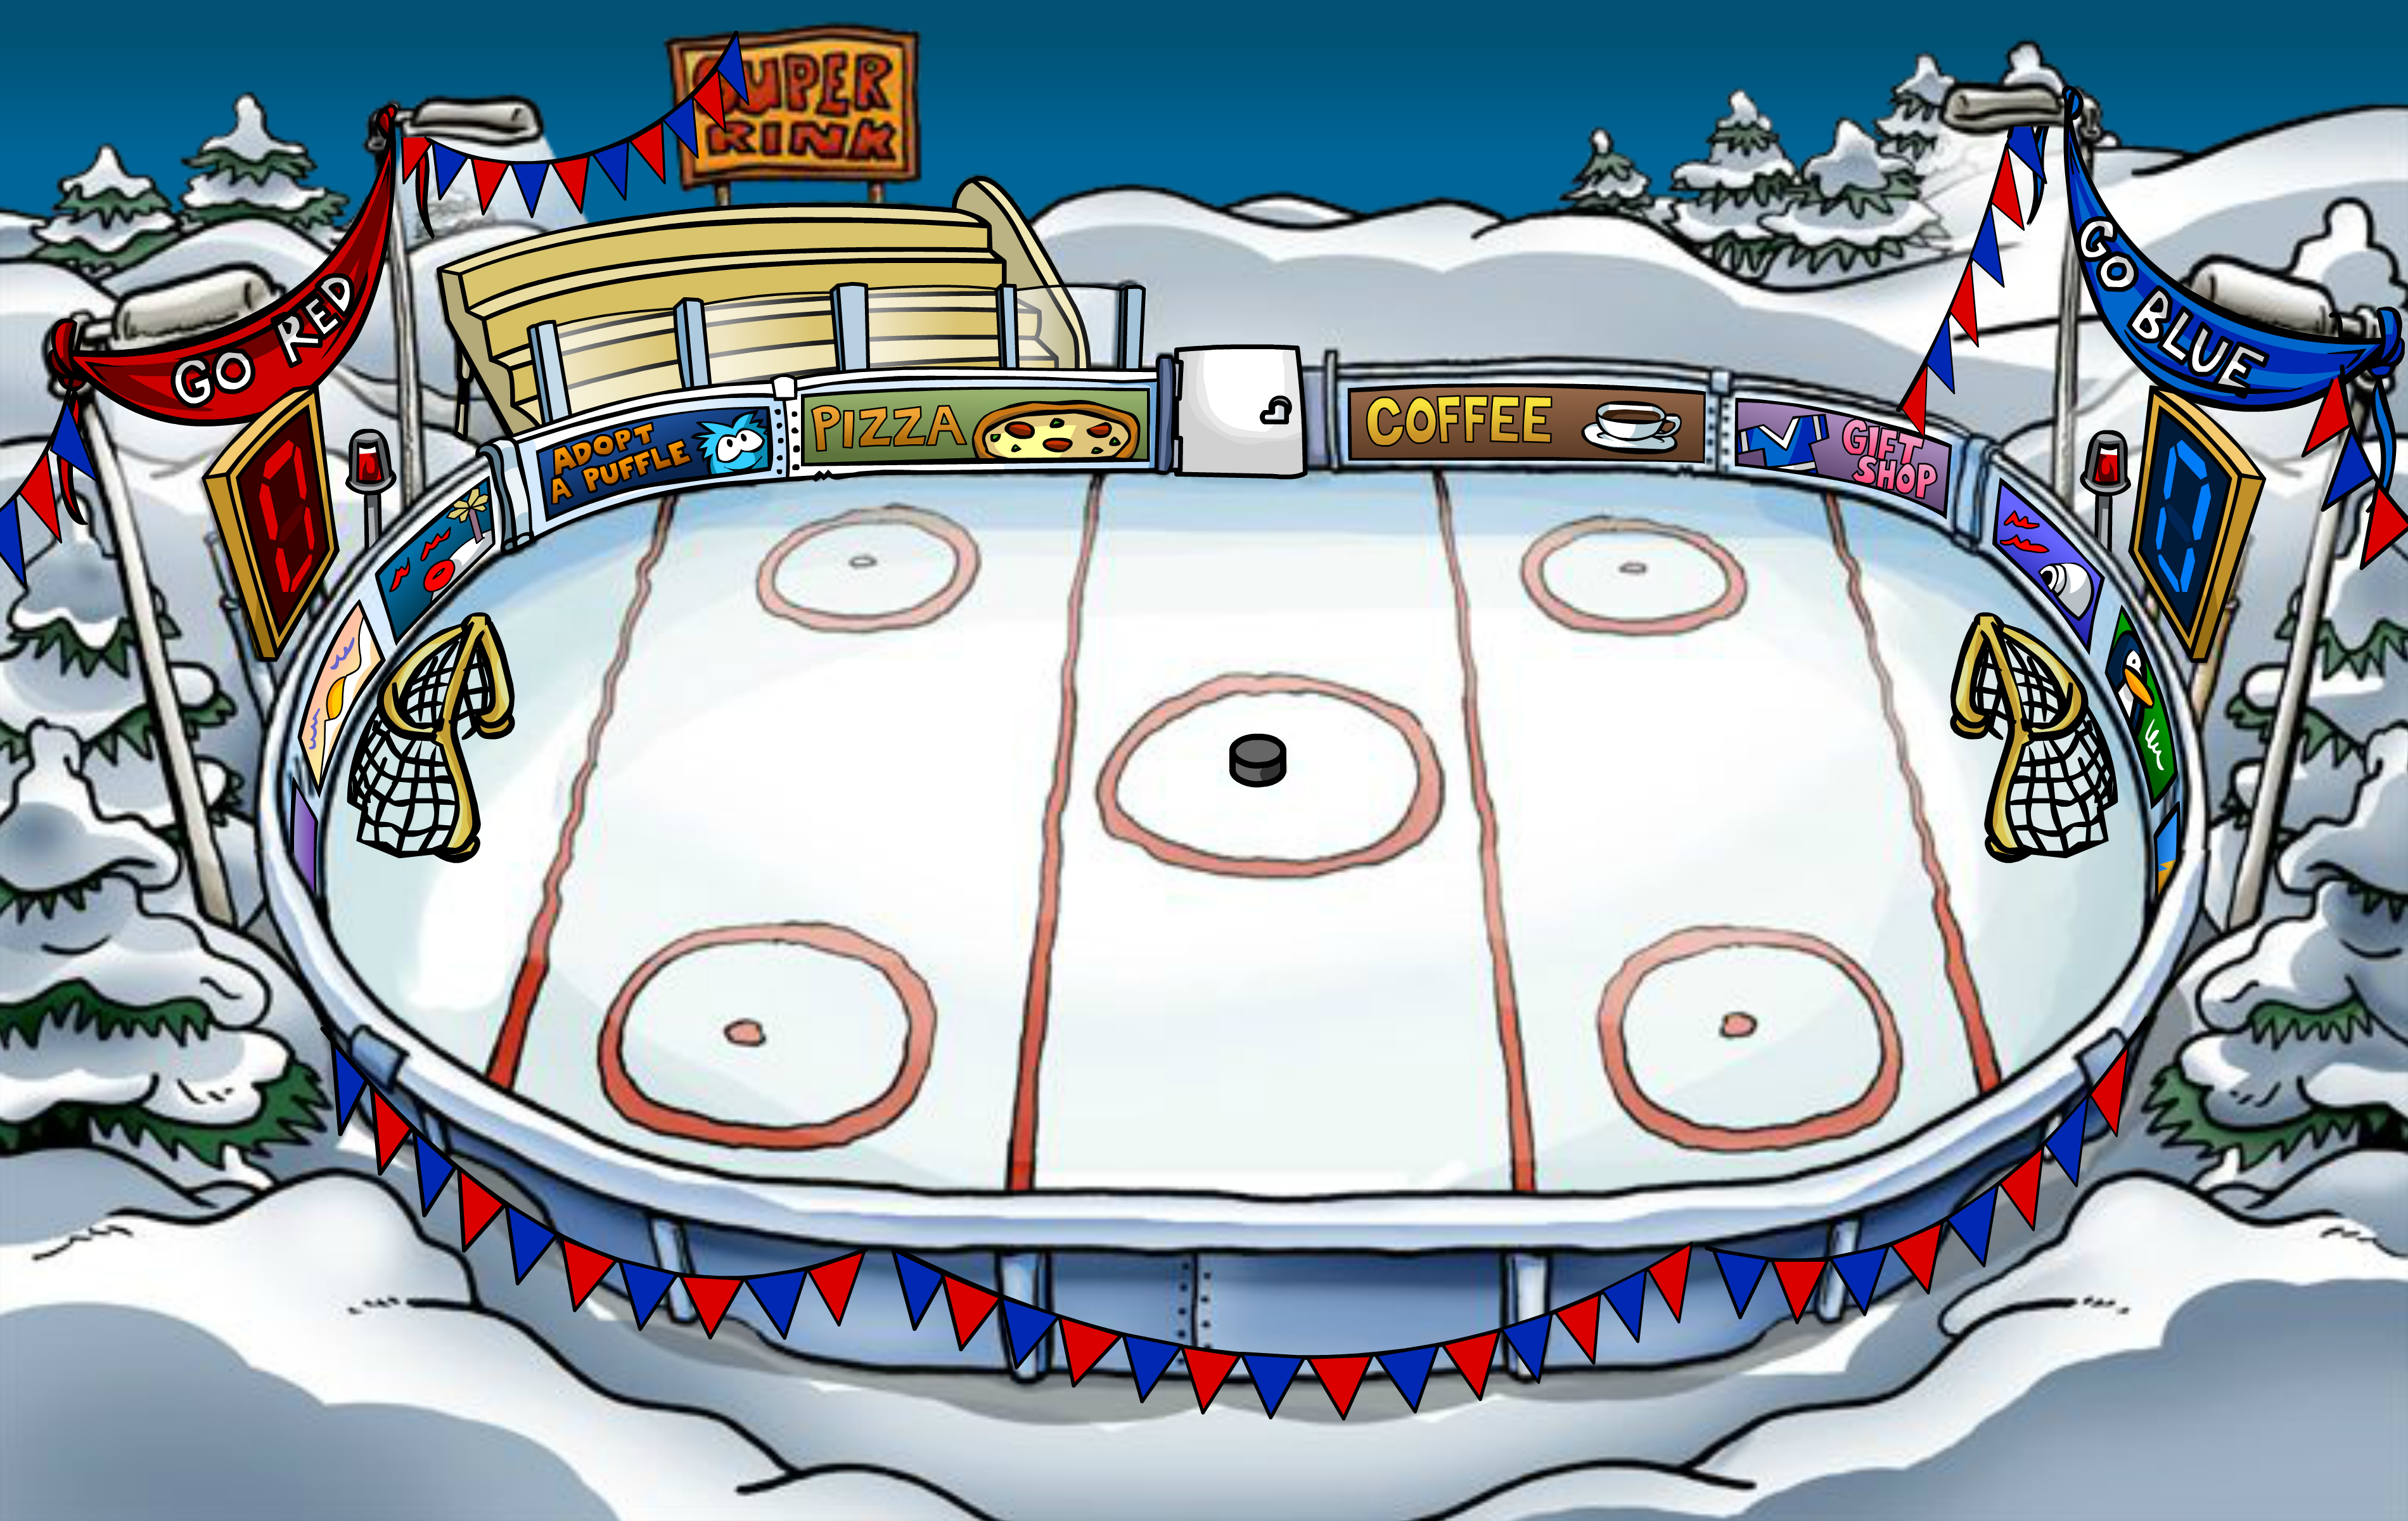 Image - Sports Party Ice Rink.png | Club Penguin Wiki | FANDOM powered